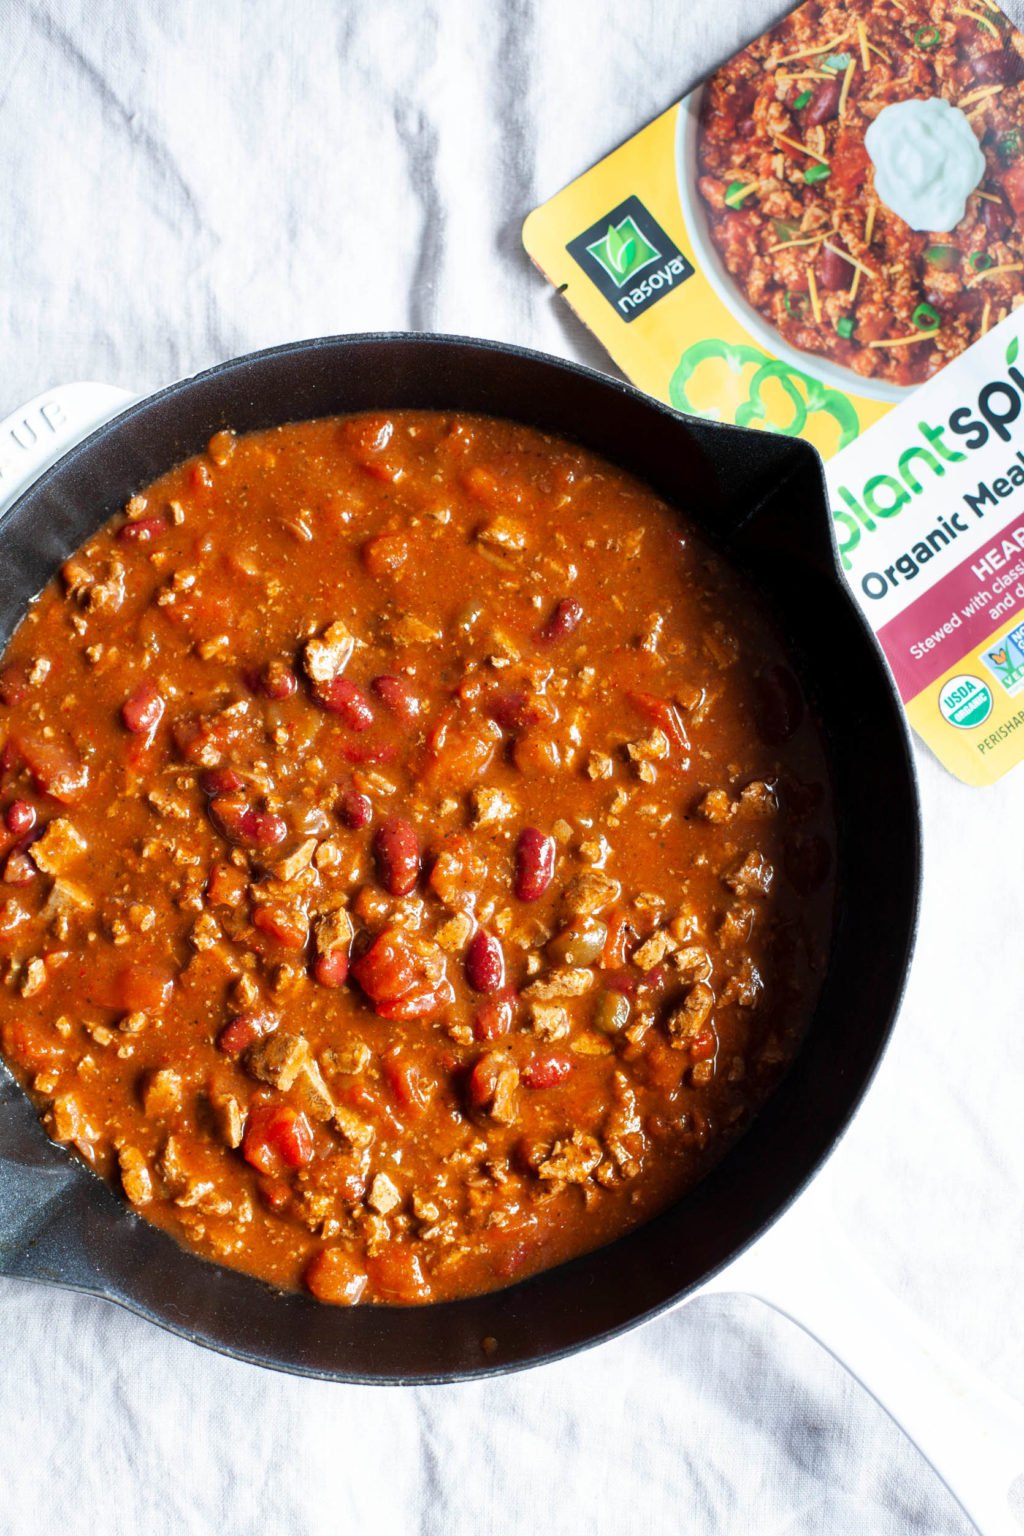 A large, cast iron skillet is filled with a bean-based chili.